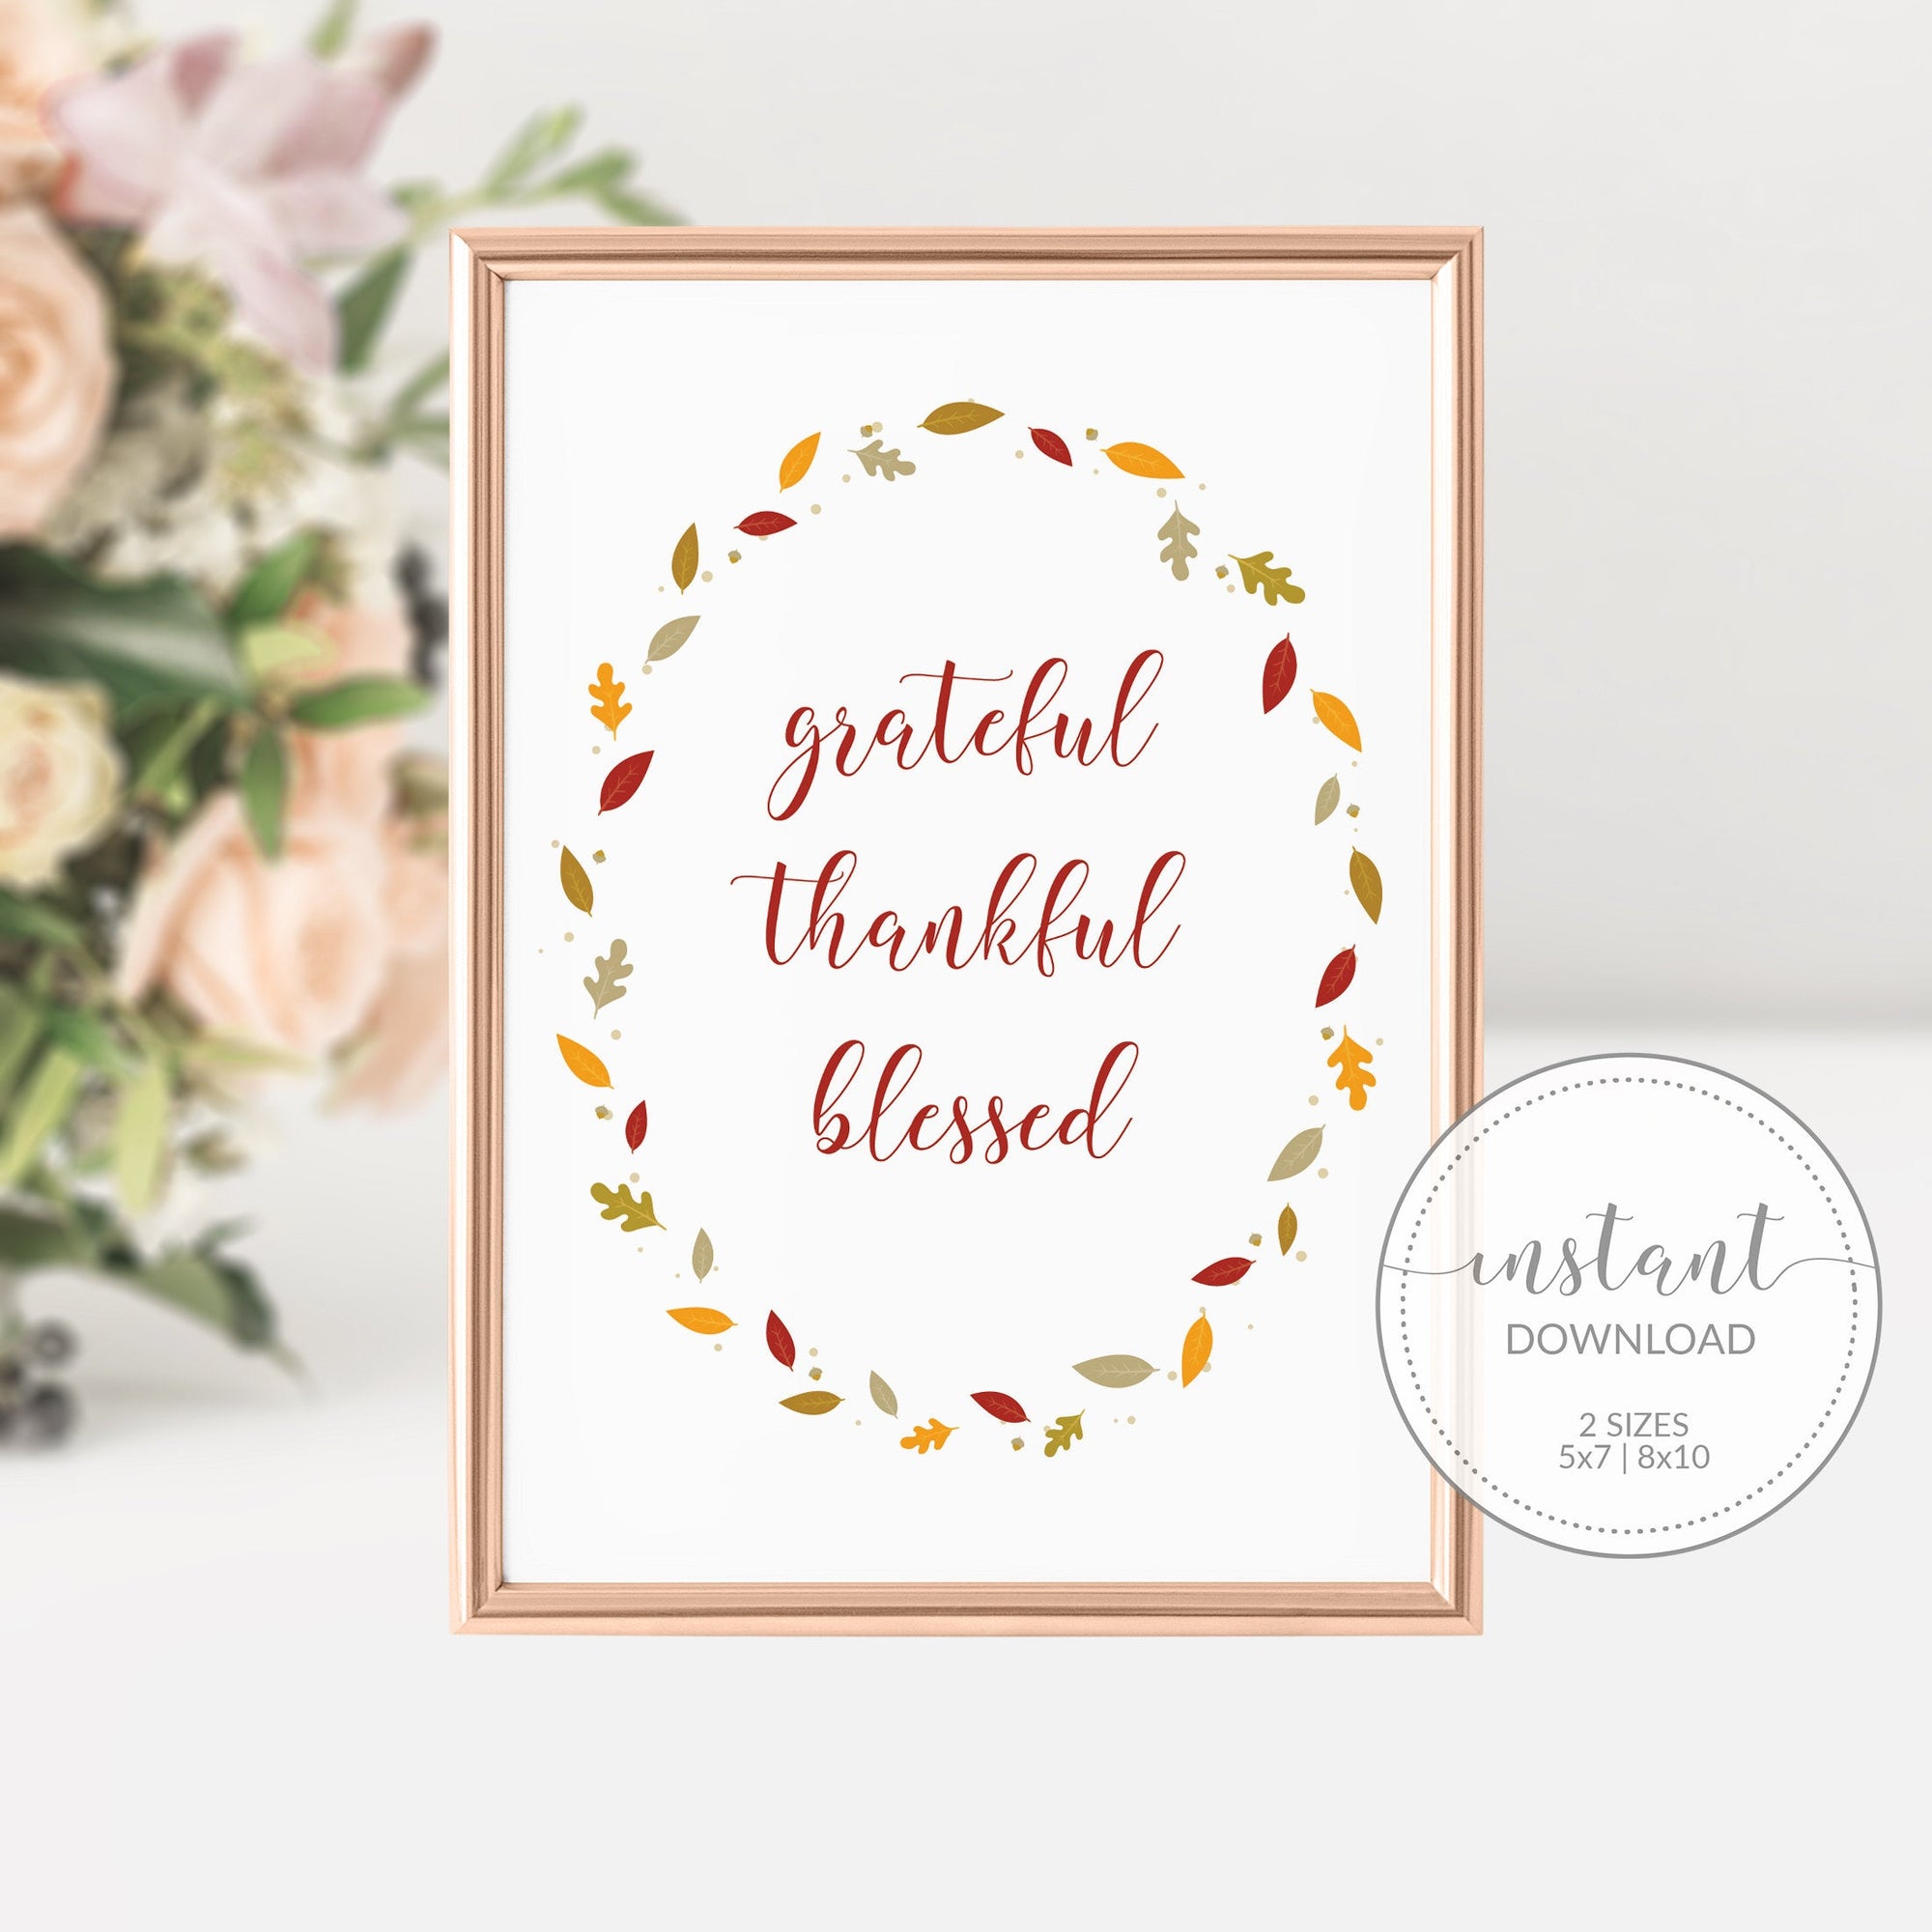 Grateful Thankful Blessed Sign, Fall Decor Printable, Thanksgiving Decorations, Fall Leaves Printable Sign, INSTANT DOWNLOAD - FL100 - @PlumPolkaDot 